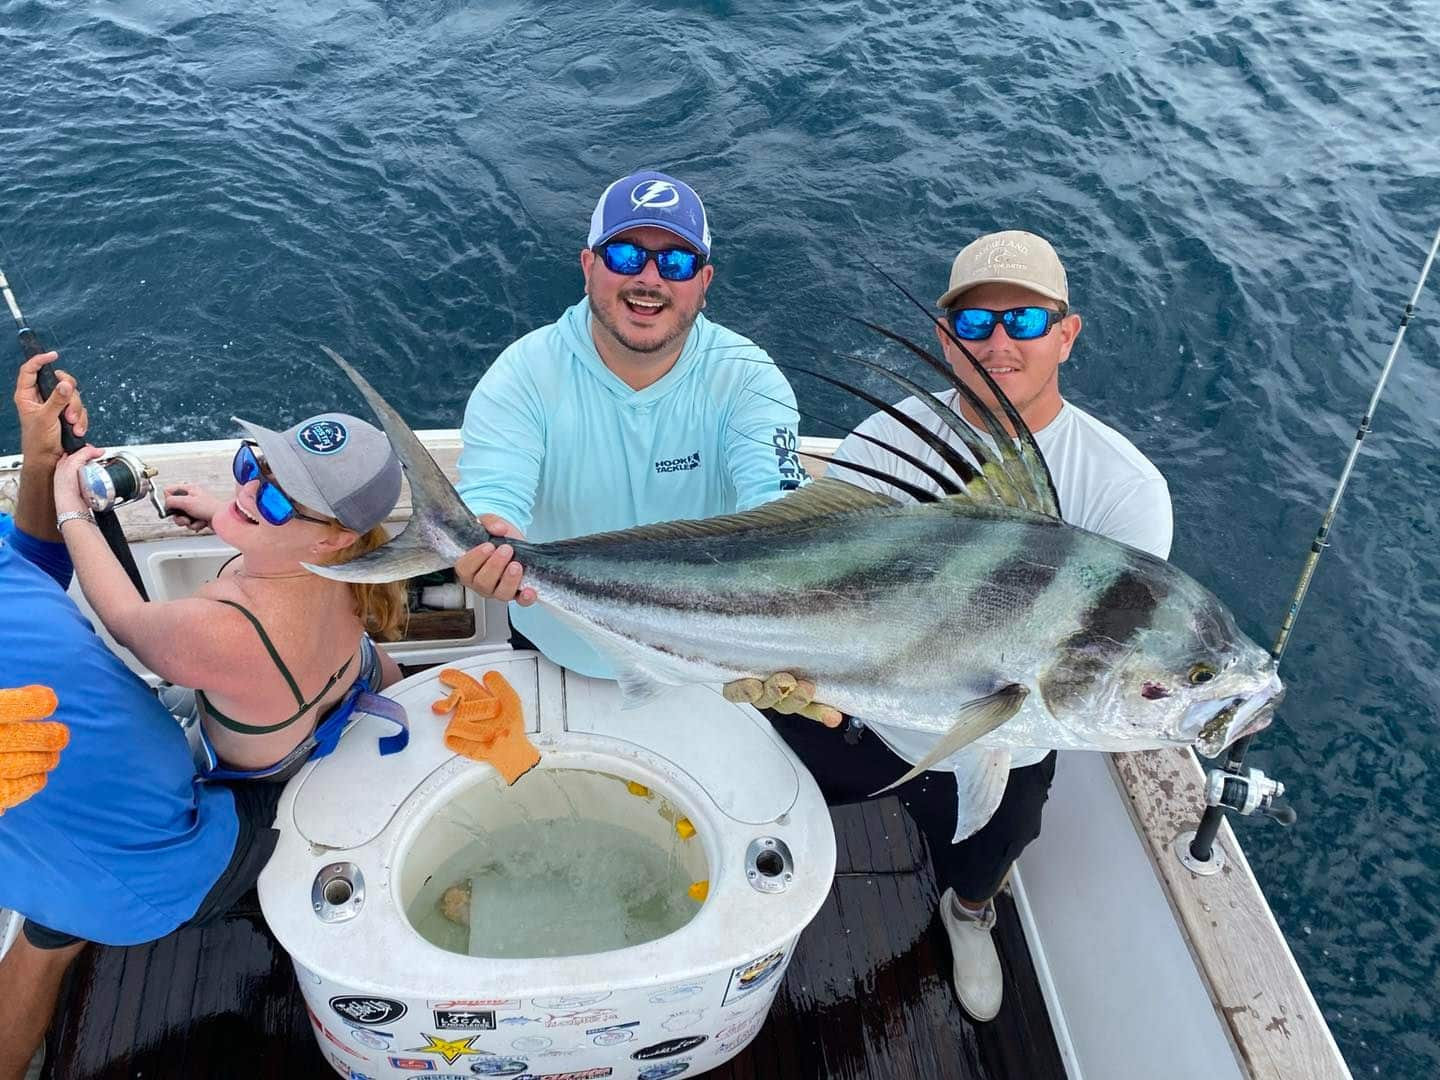 30 ft. Chris Craft, Wing Man, 4 anglers max, Los Suenos by CR